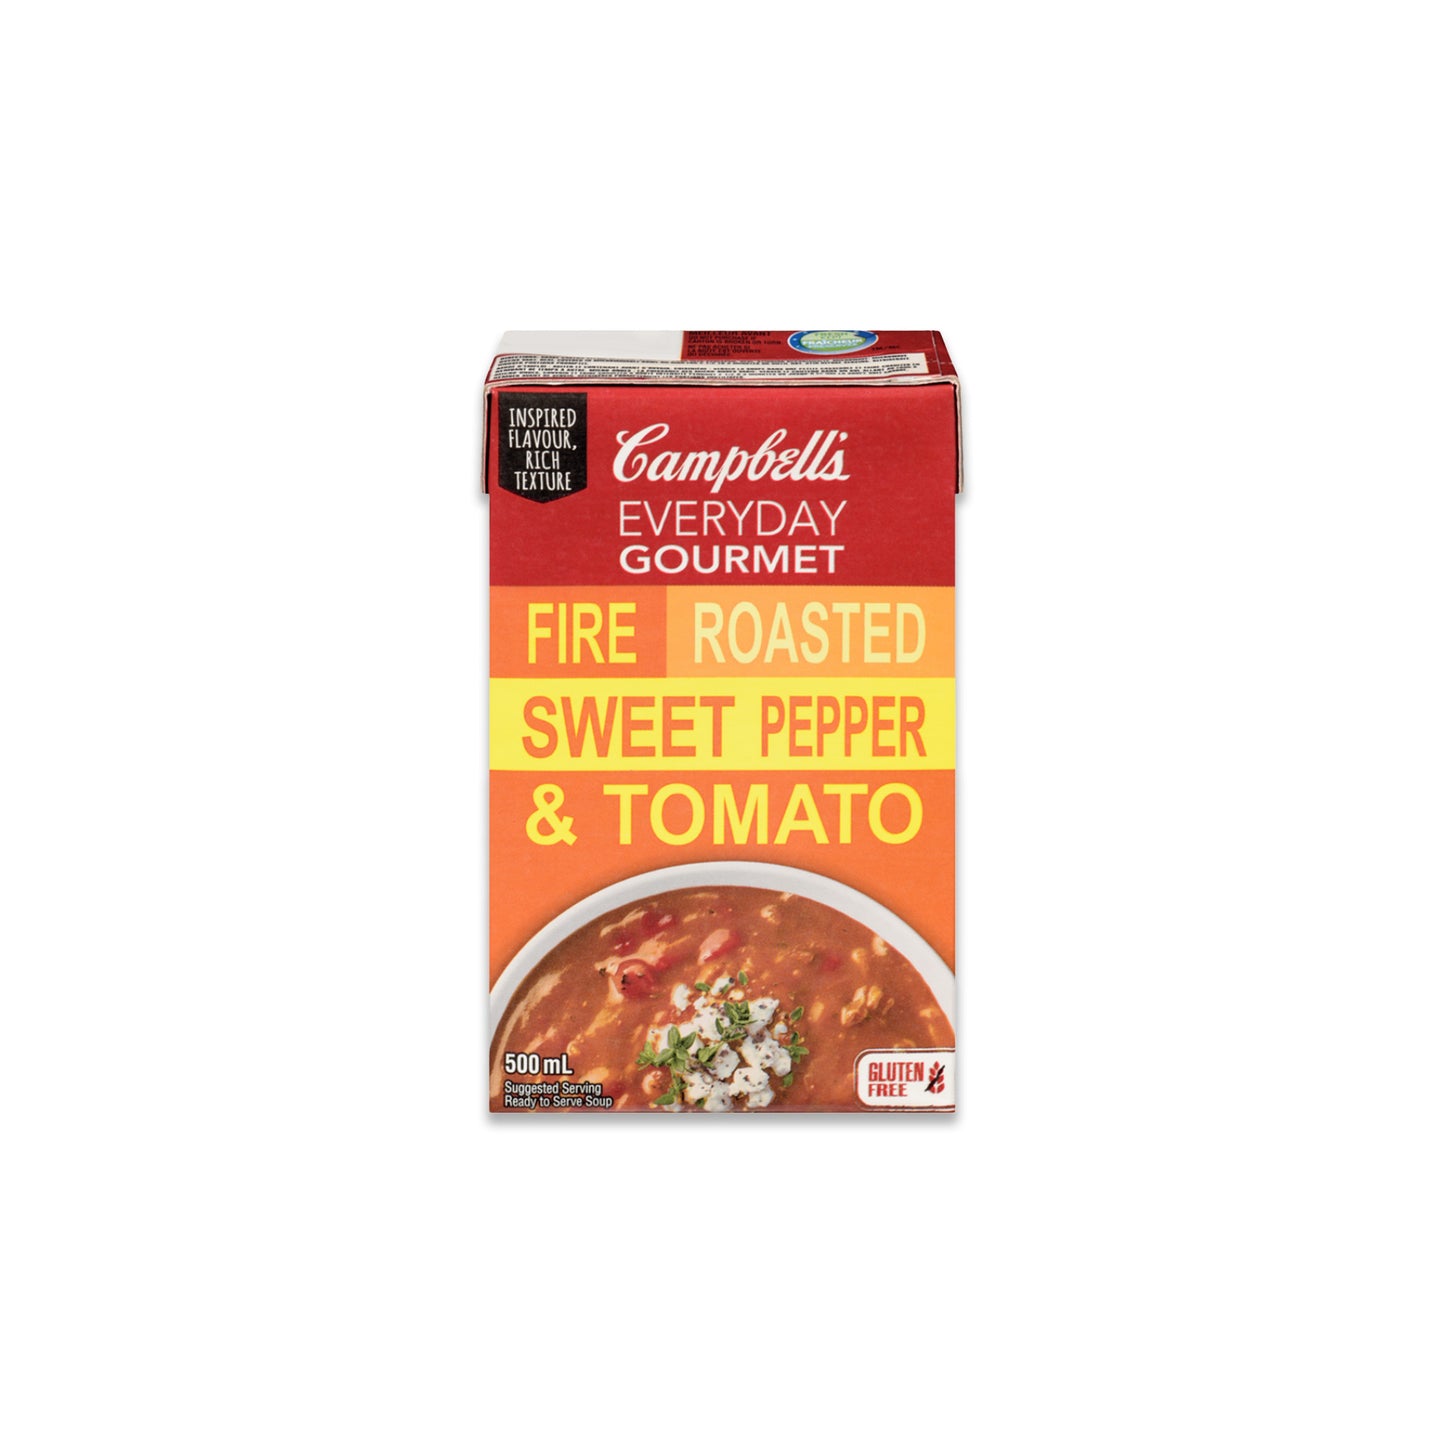 Soup - Campbells Everyday Gourmet (Fireroasted Sweet Pepper/Tomato)